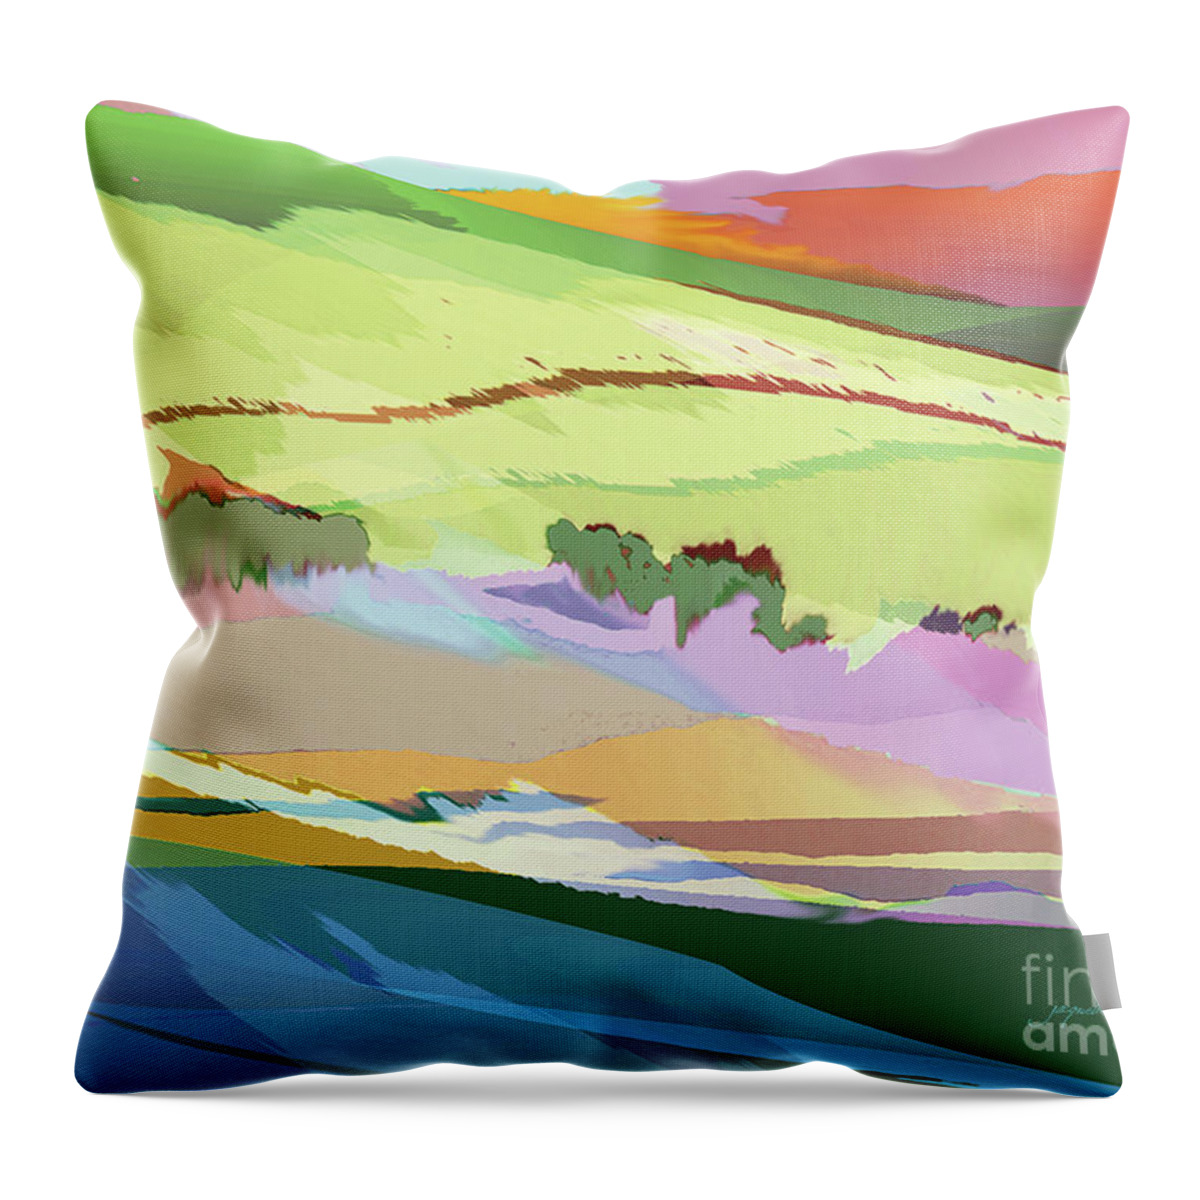 Landscape Throw Pillow featuring the digital art Foothills by Jacqueline Shuler